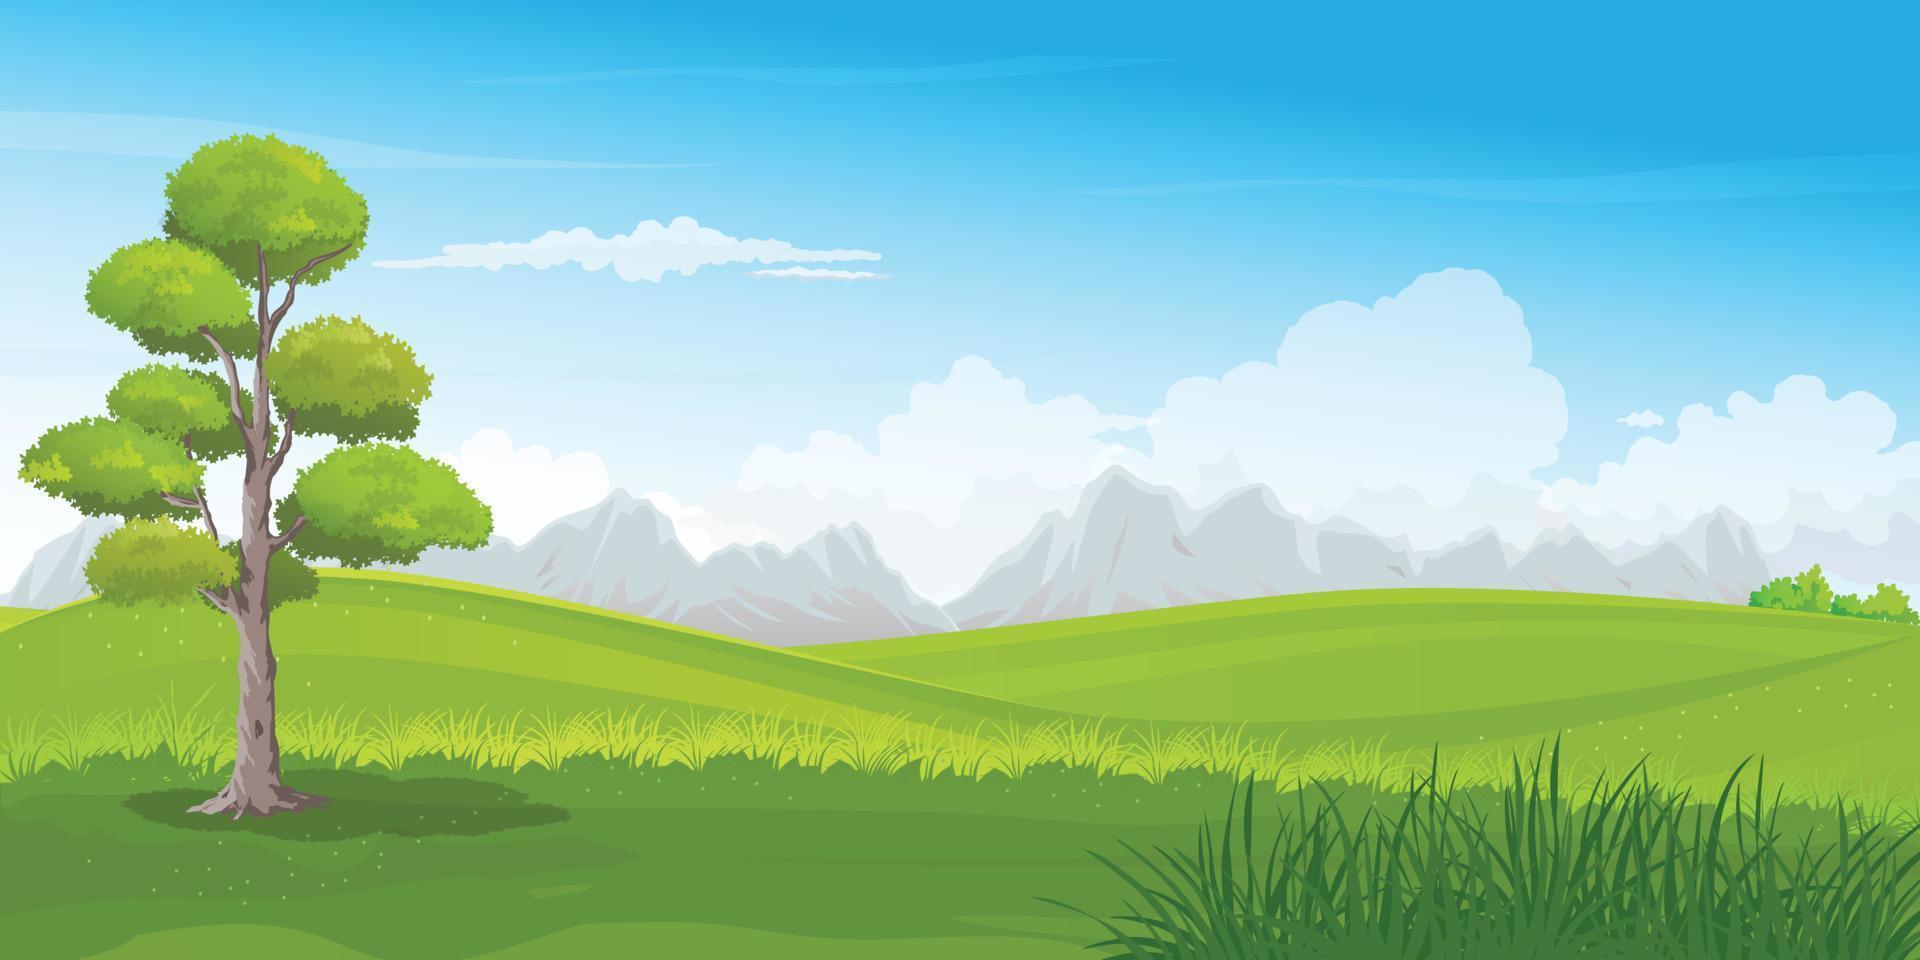 Nature Landscape of Green Meadow and Hills Illustration vector